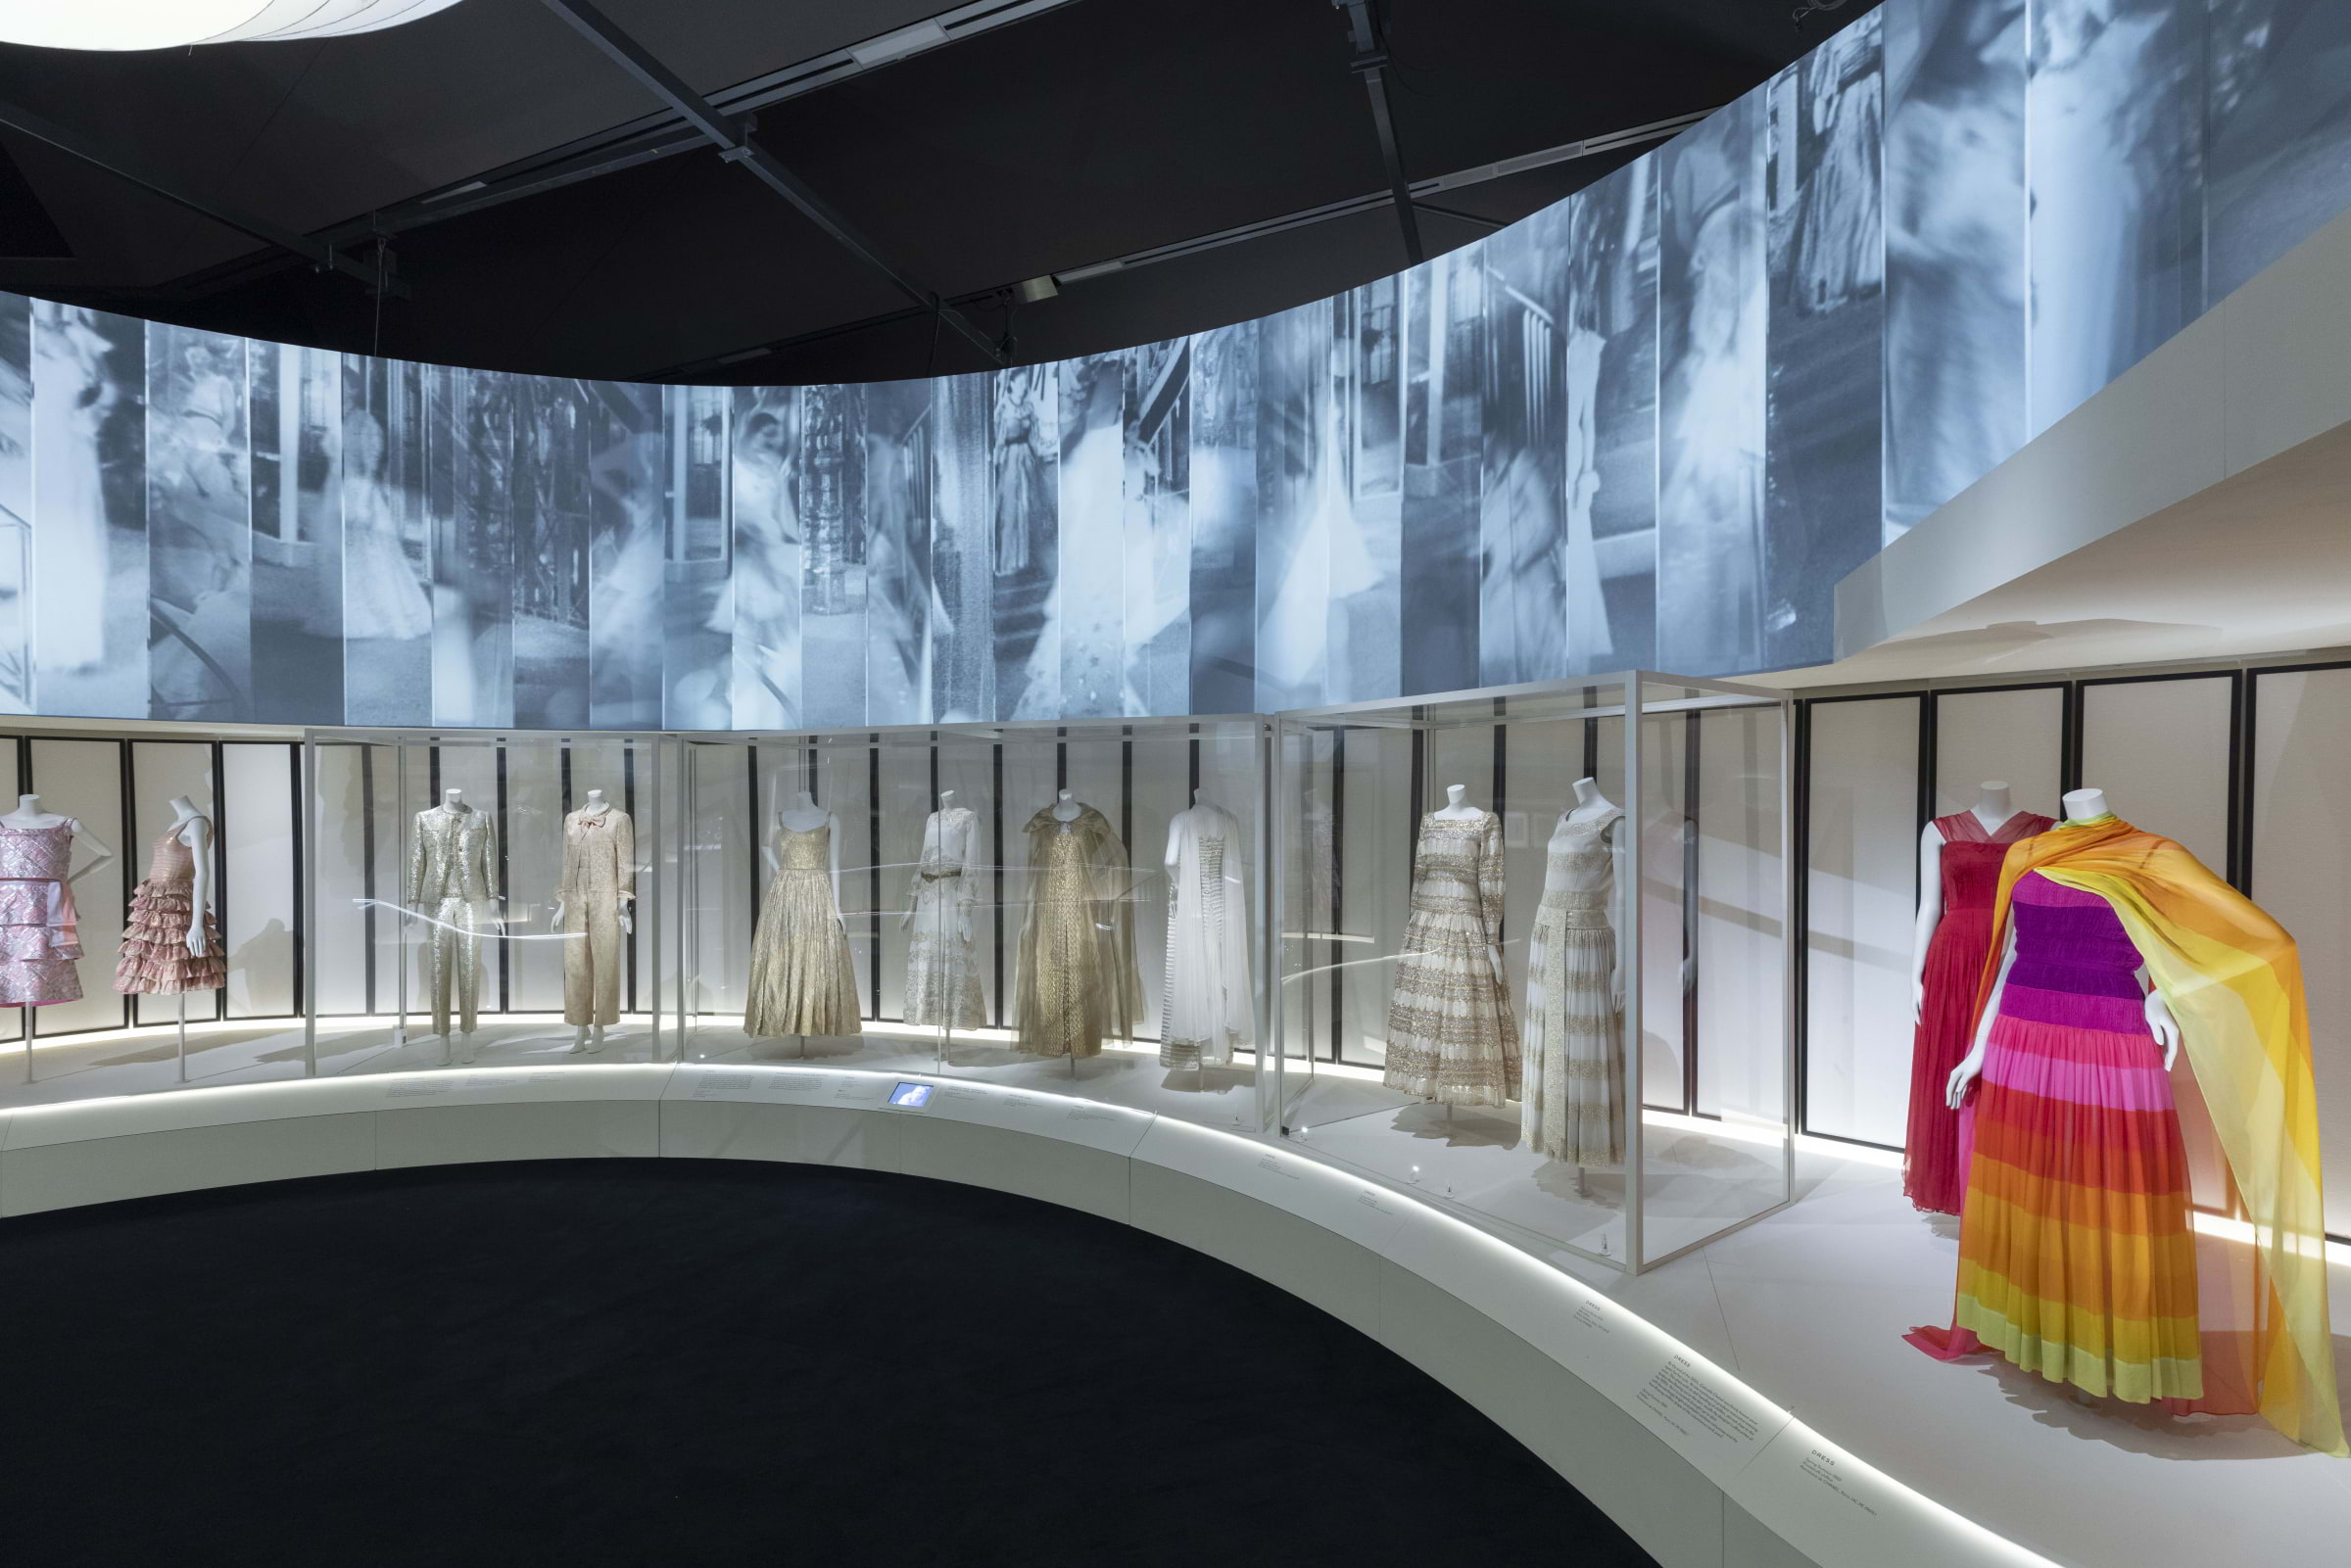 Coco' Chanel's influential fashion on show at London exhibit